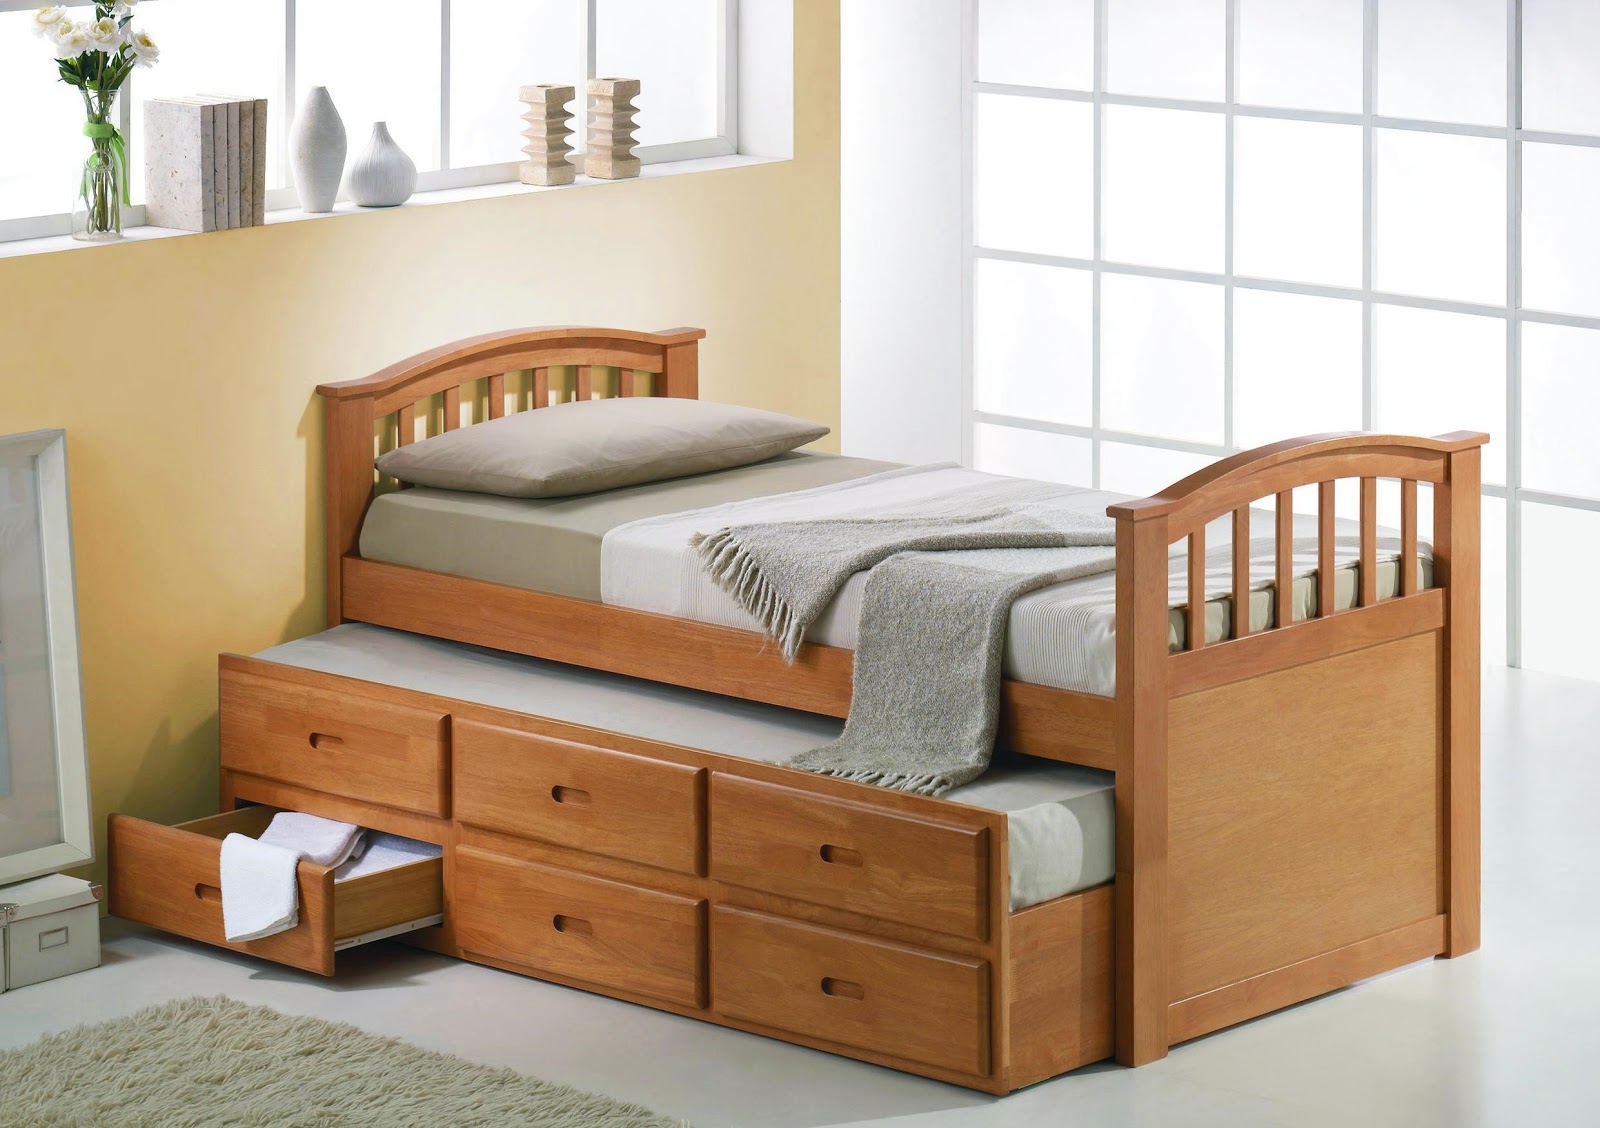 Woodwork Wooden Bed Designs With Storage In India PDF Plans